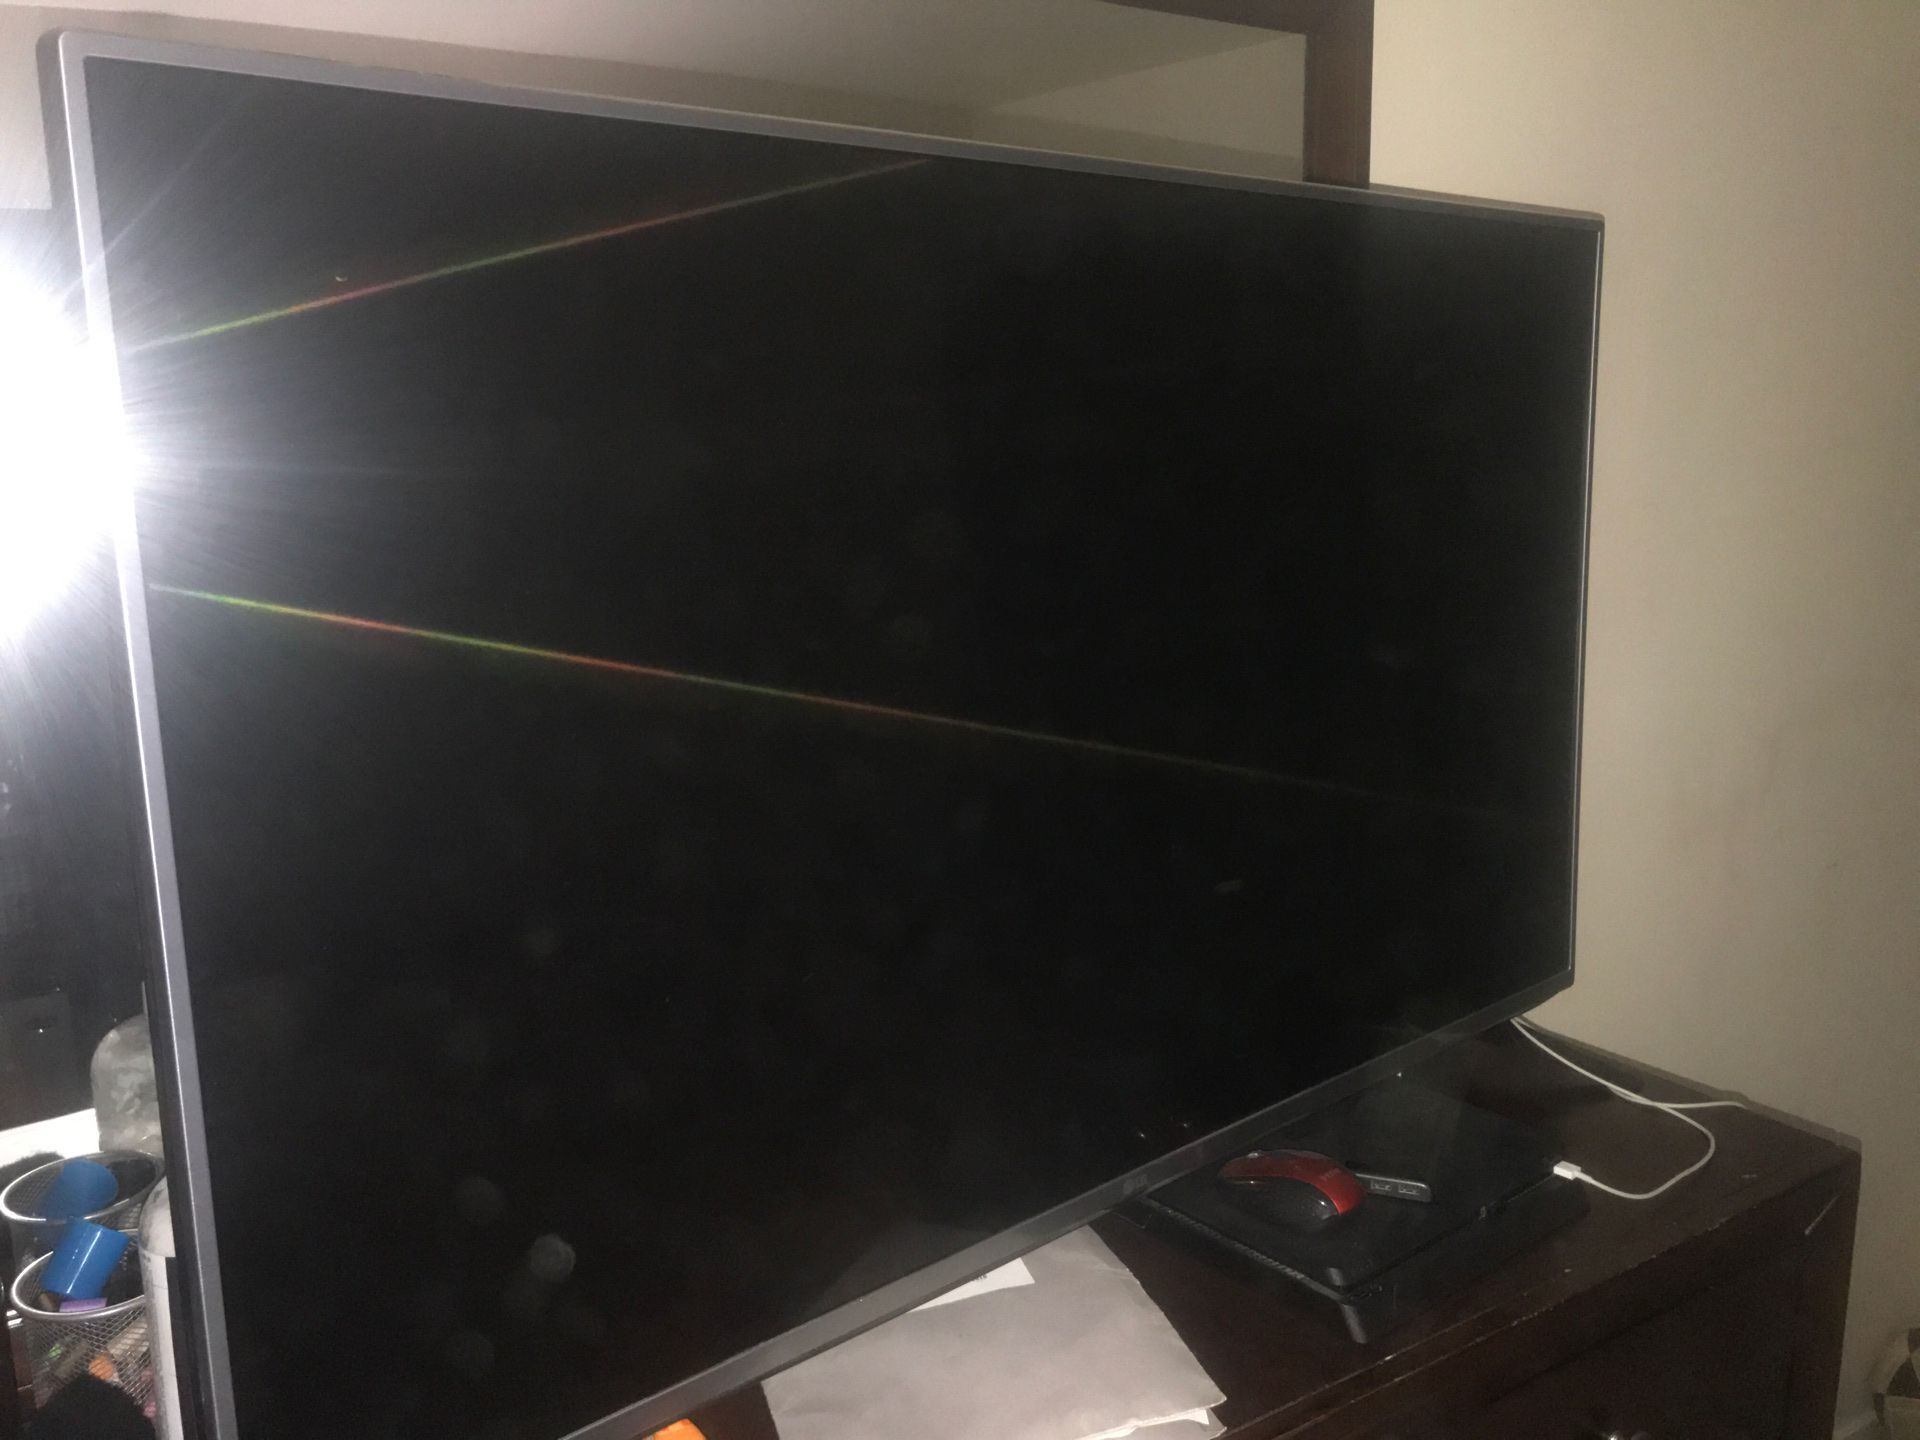 Tv LG 50 Inches ( I need it gone , I just bought a new one